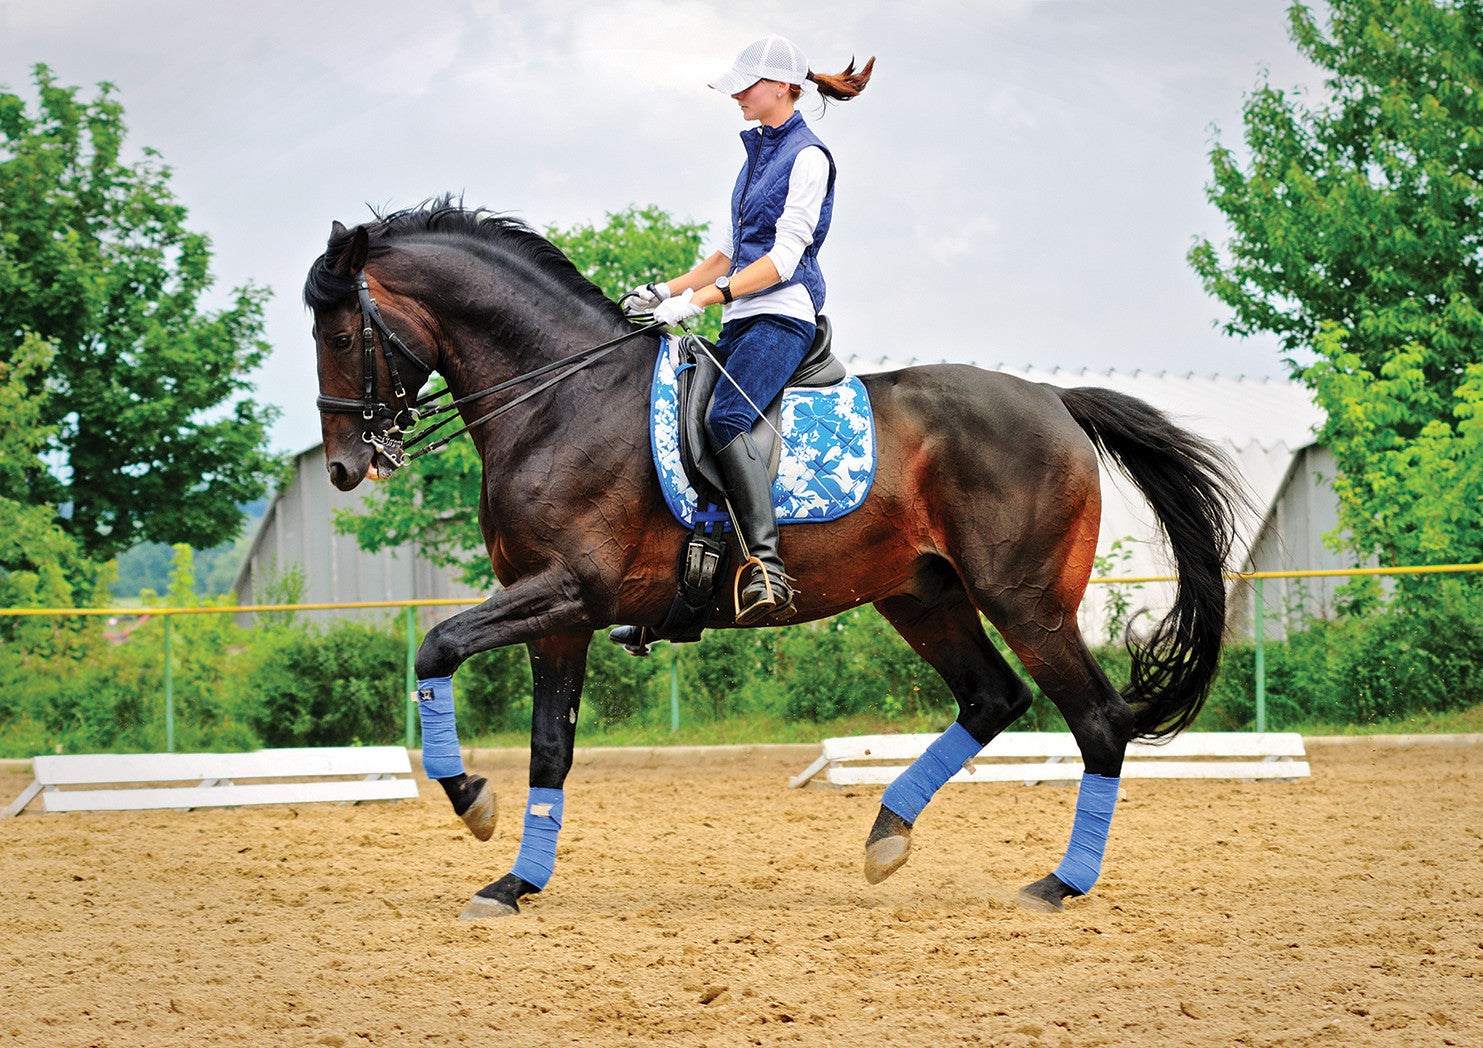 Dressage review in Equine Journal: Pony Tail Sportswear #1!!